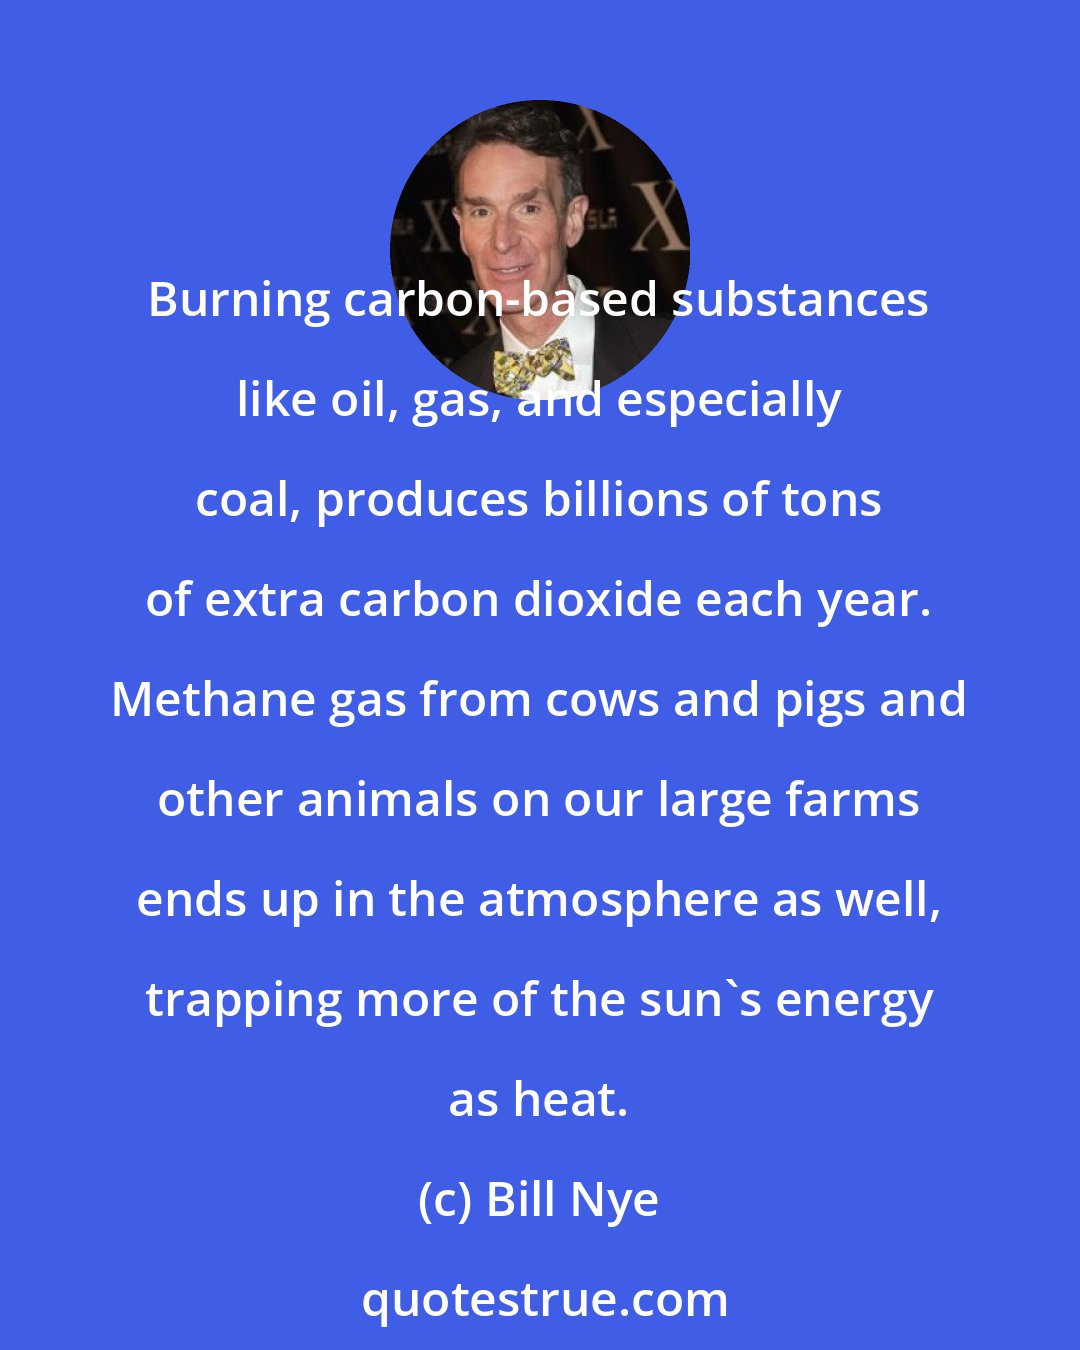 Bill Nye: Burning carbon-based substances like oil, gas, and especially coal, produces billions of tons of extra carbon dioxide each year. Methane gas from cows and pigs and other animals on our large farms ends up in the atmosphere as well, trapping more of the sun's energy as heat.